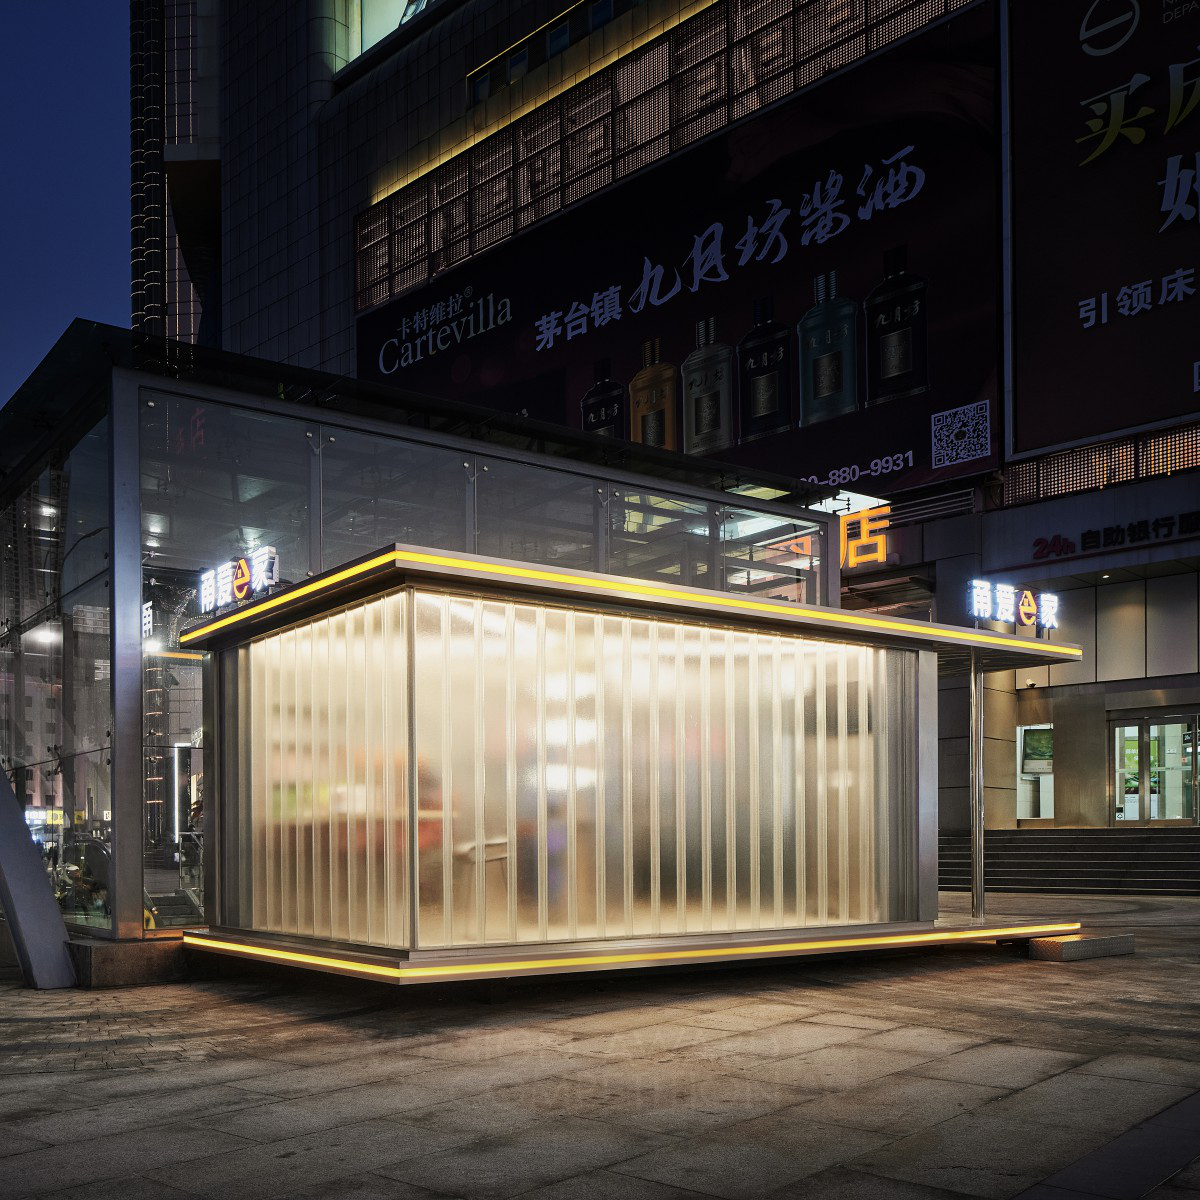 Yard Studio wins Golden at the prestigious A' Social Design Award with City Lounge Station City Lounge Station.